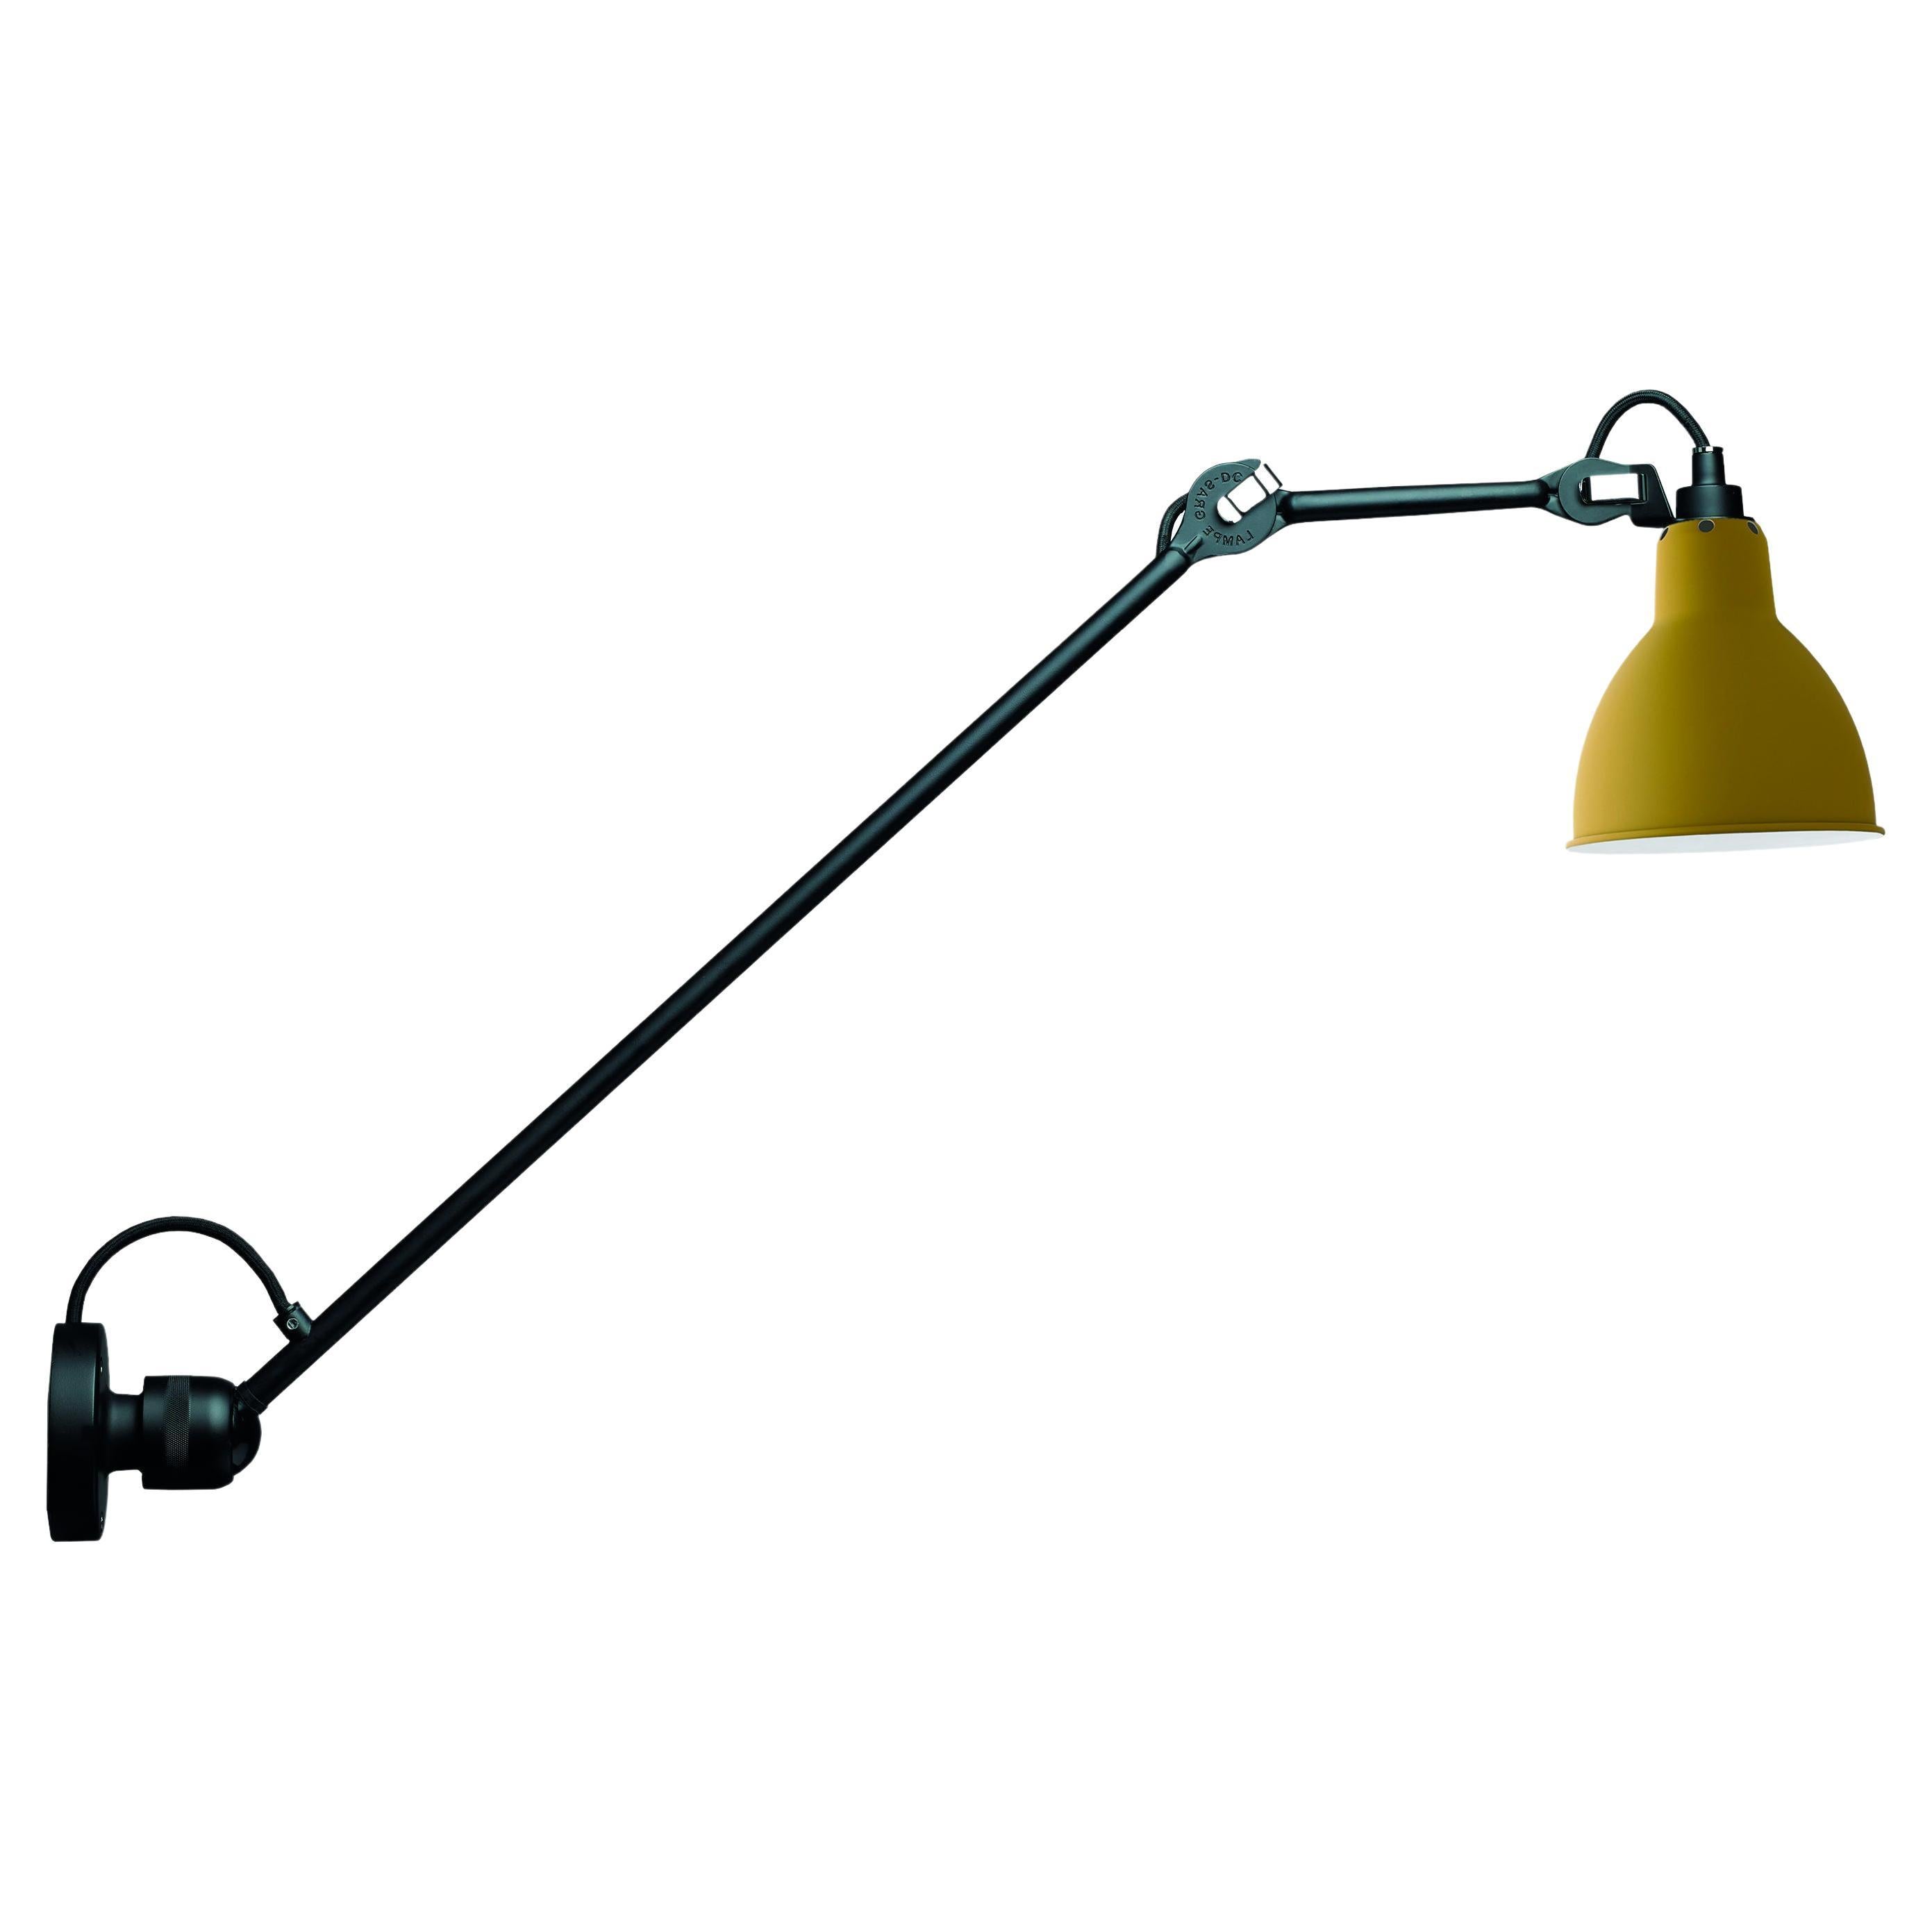 DCW Editions La Lampe Gras N°304 L60 Wall Lamp in Black Arm and Yellow Shade